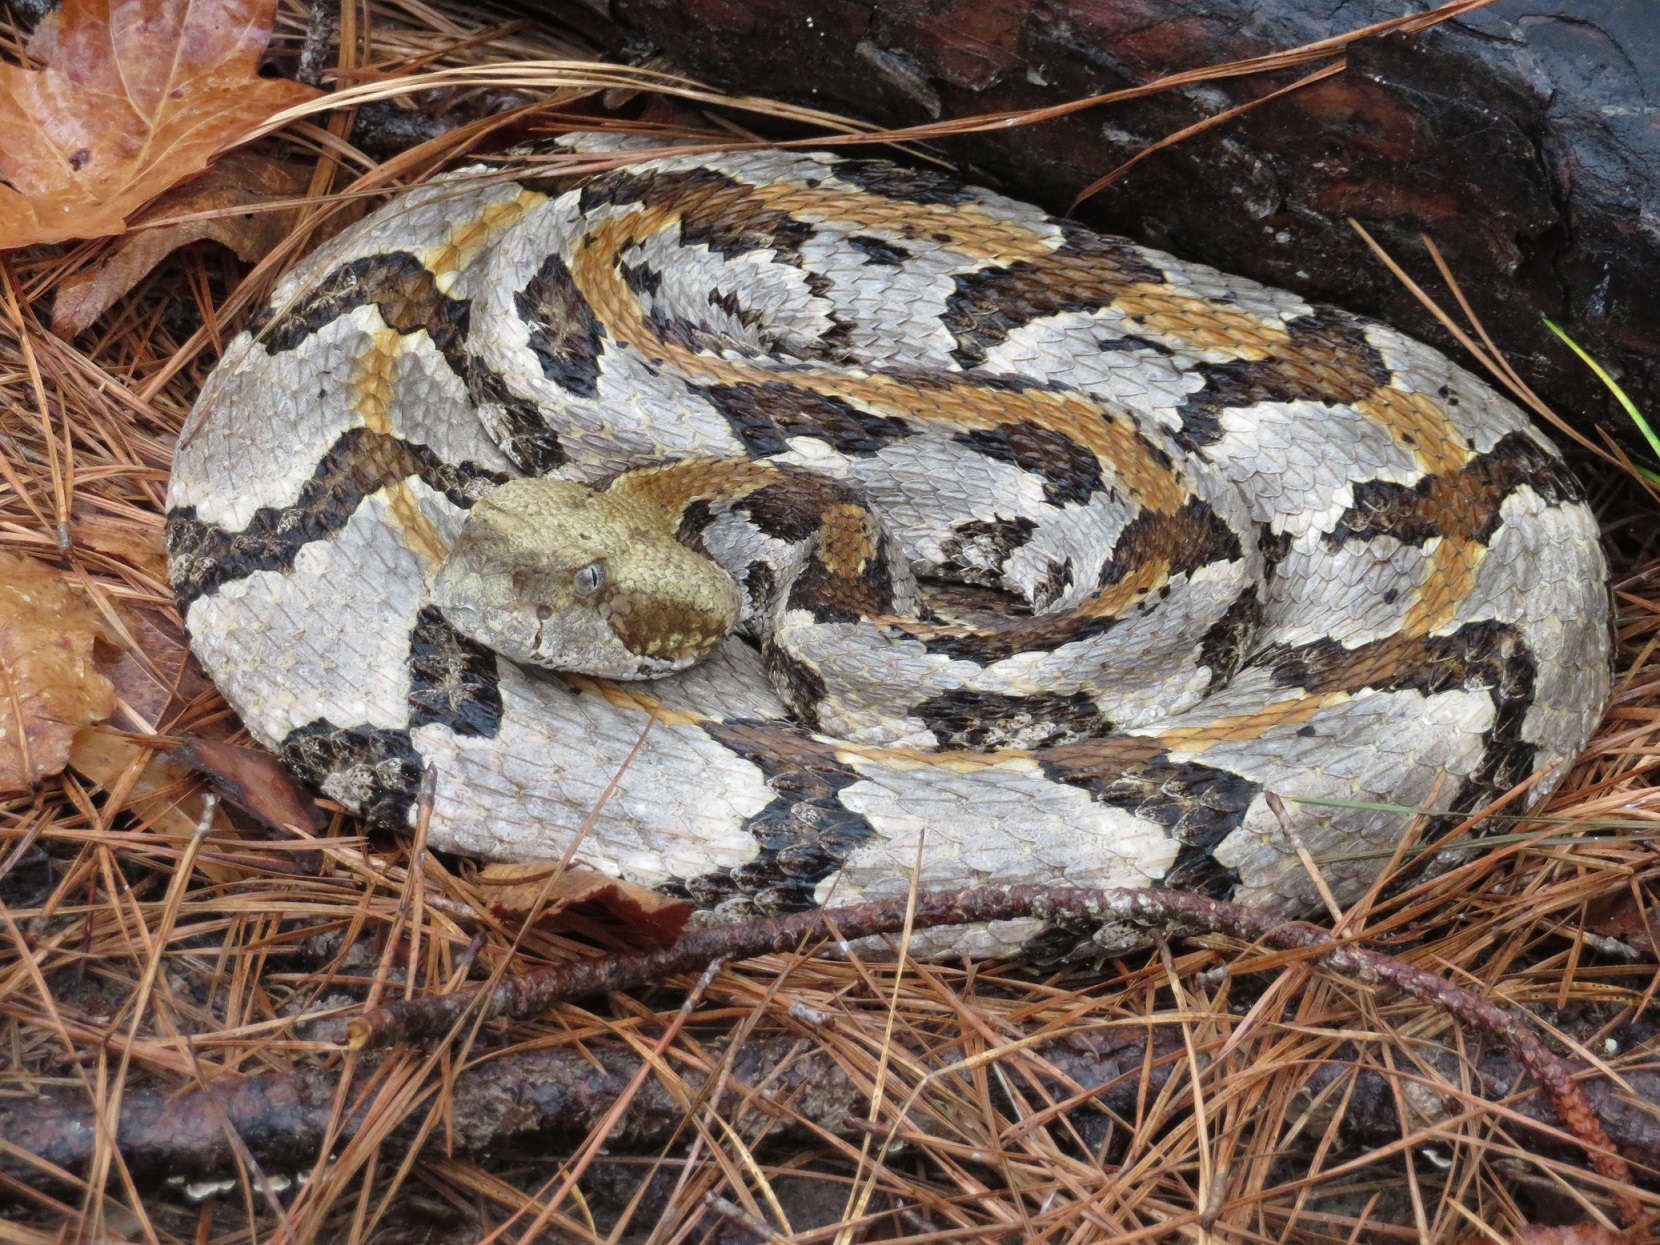 closeup of a coiled timber rattlesnake among pine needles and leaves